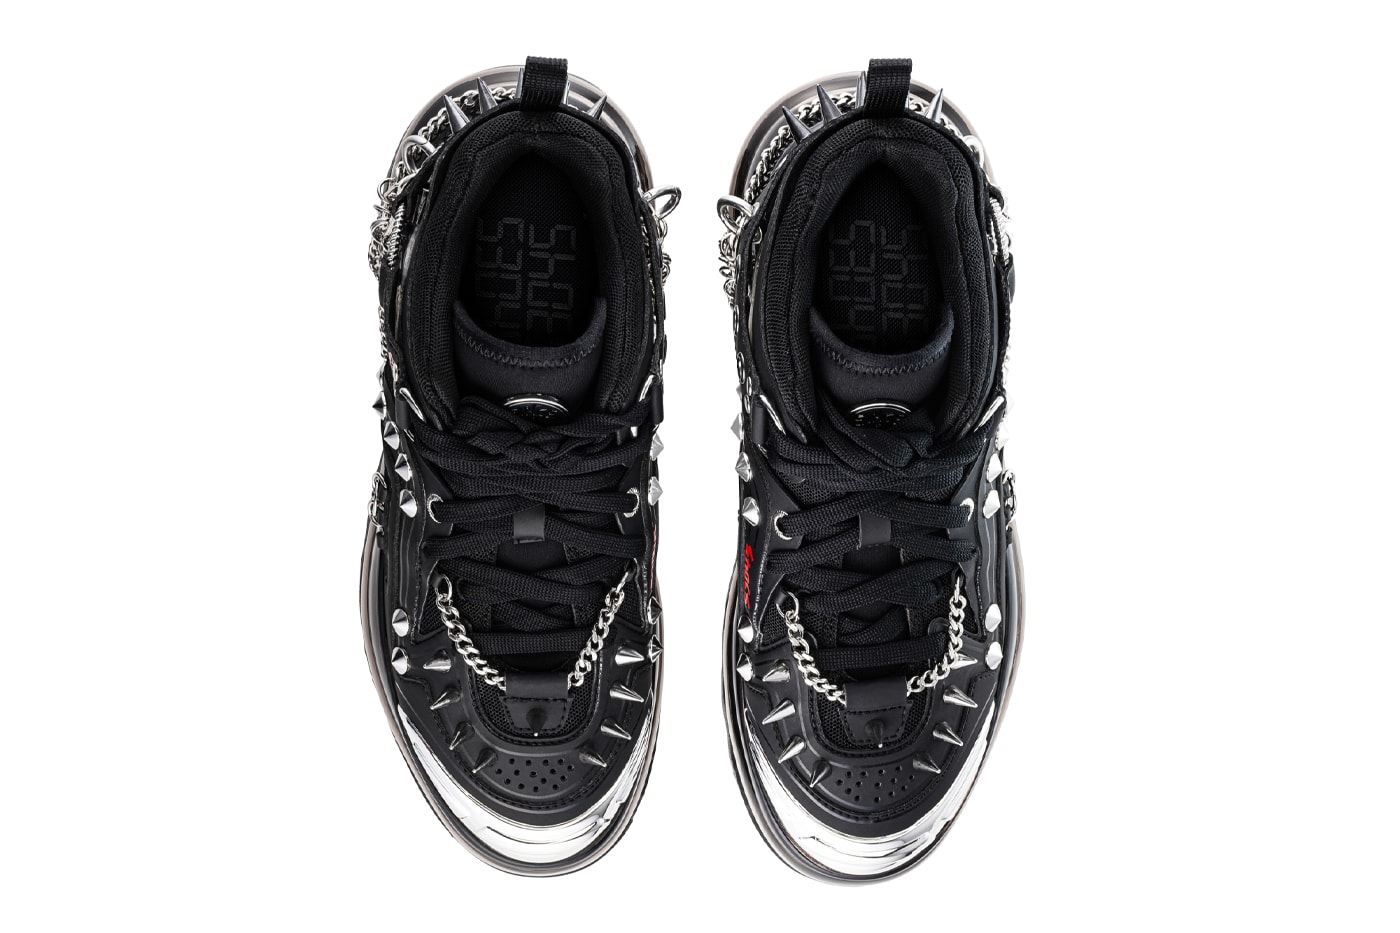 SHOES 53045 Bump'Air High Top Black Gothic Release Info sneaker shoes footwear designer where to cop drop details price COVID-19 Student Resource Food Fund DAVID TOURNIAIRE-BEAUCIEL bajowoo 99%iS